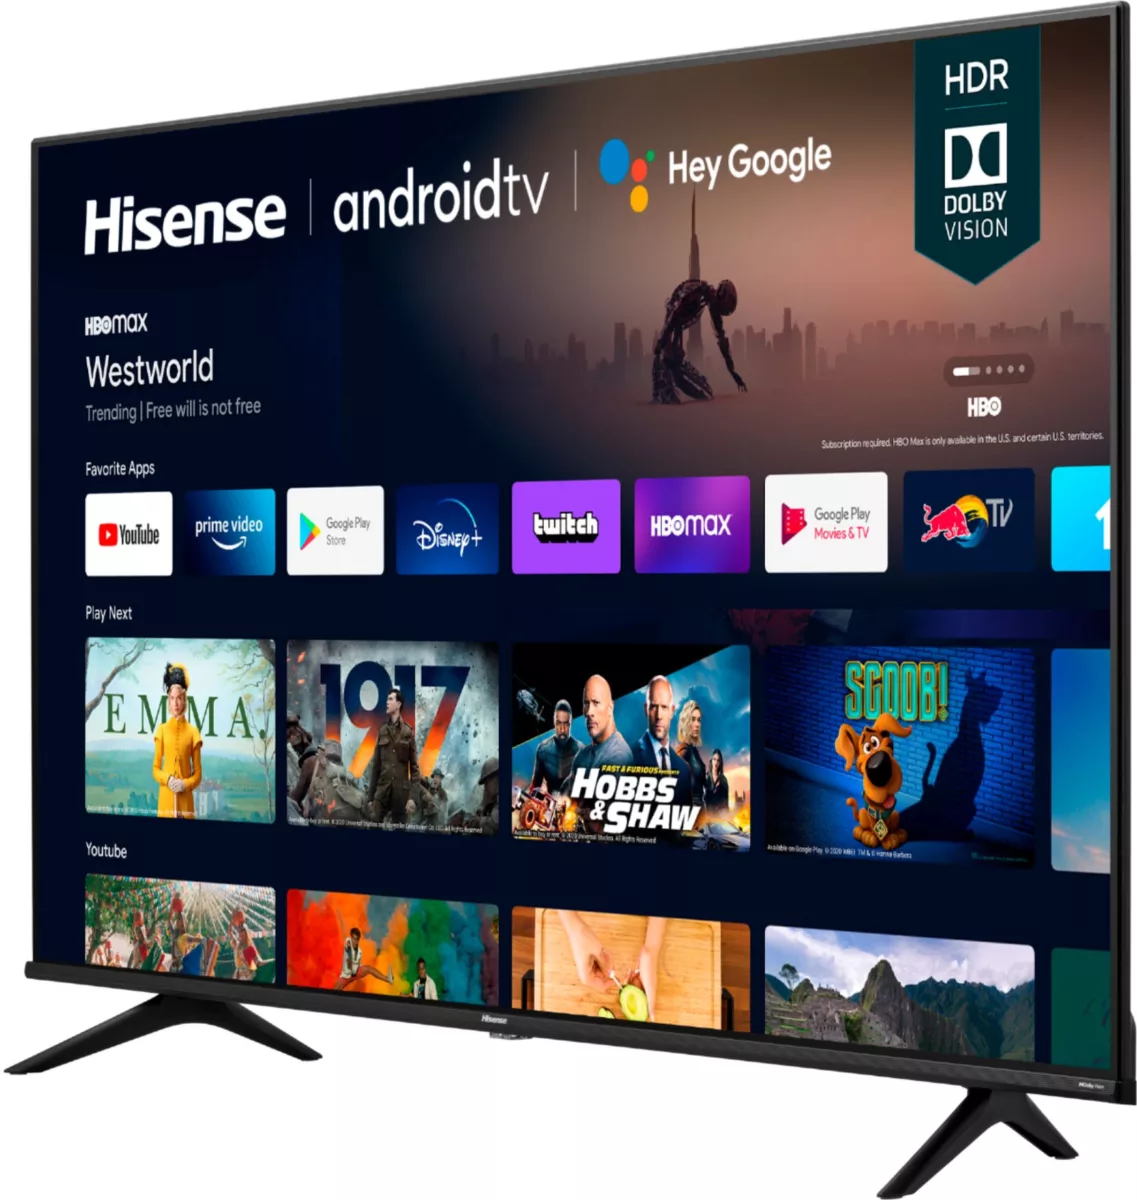 How to Fix No Sound on Your Hisense TV? 1